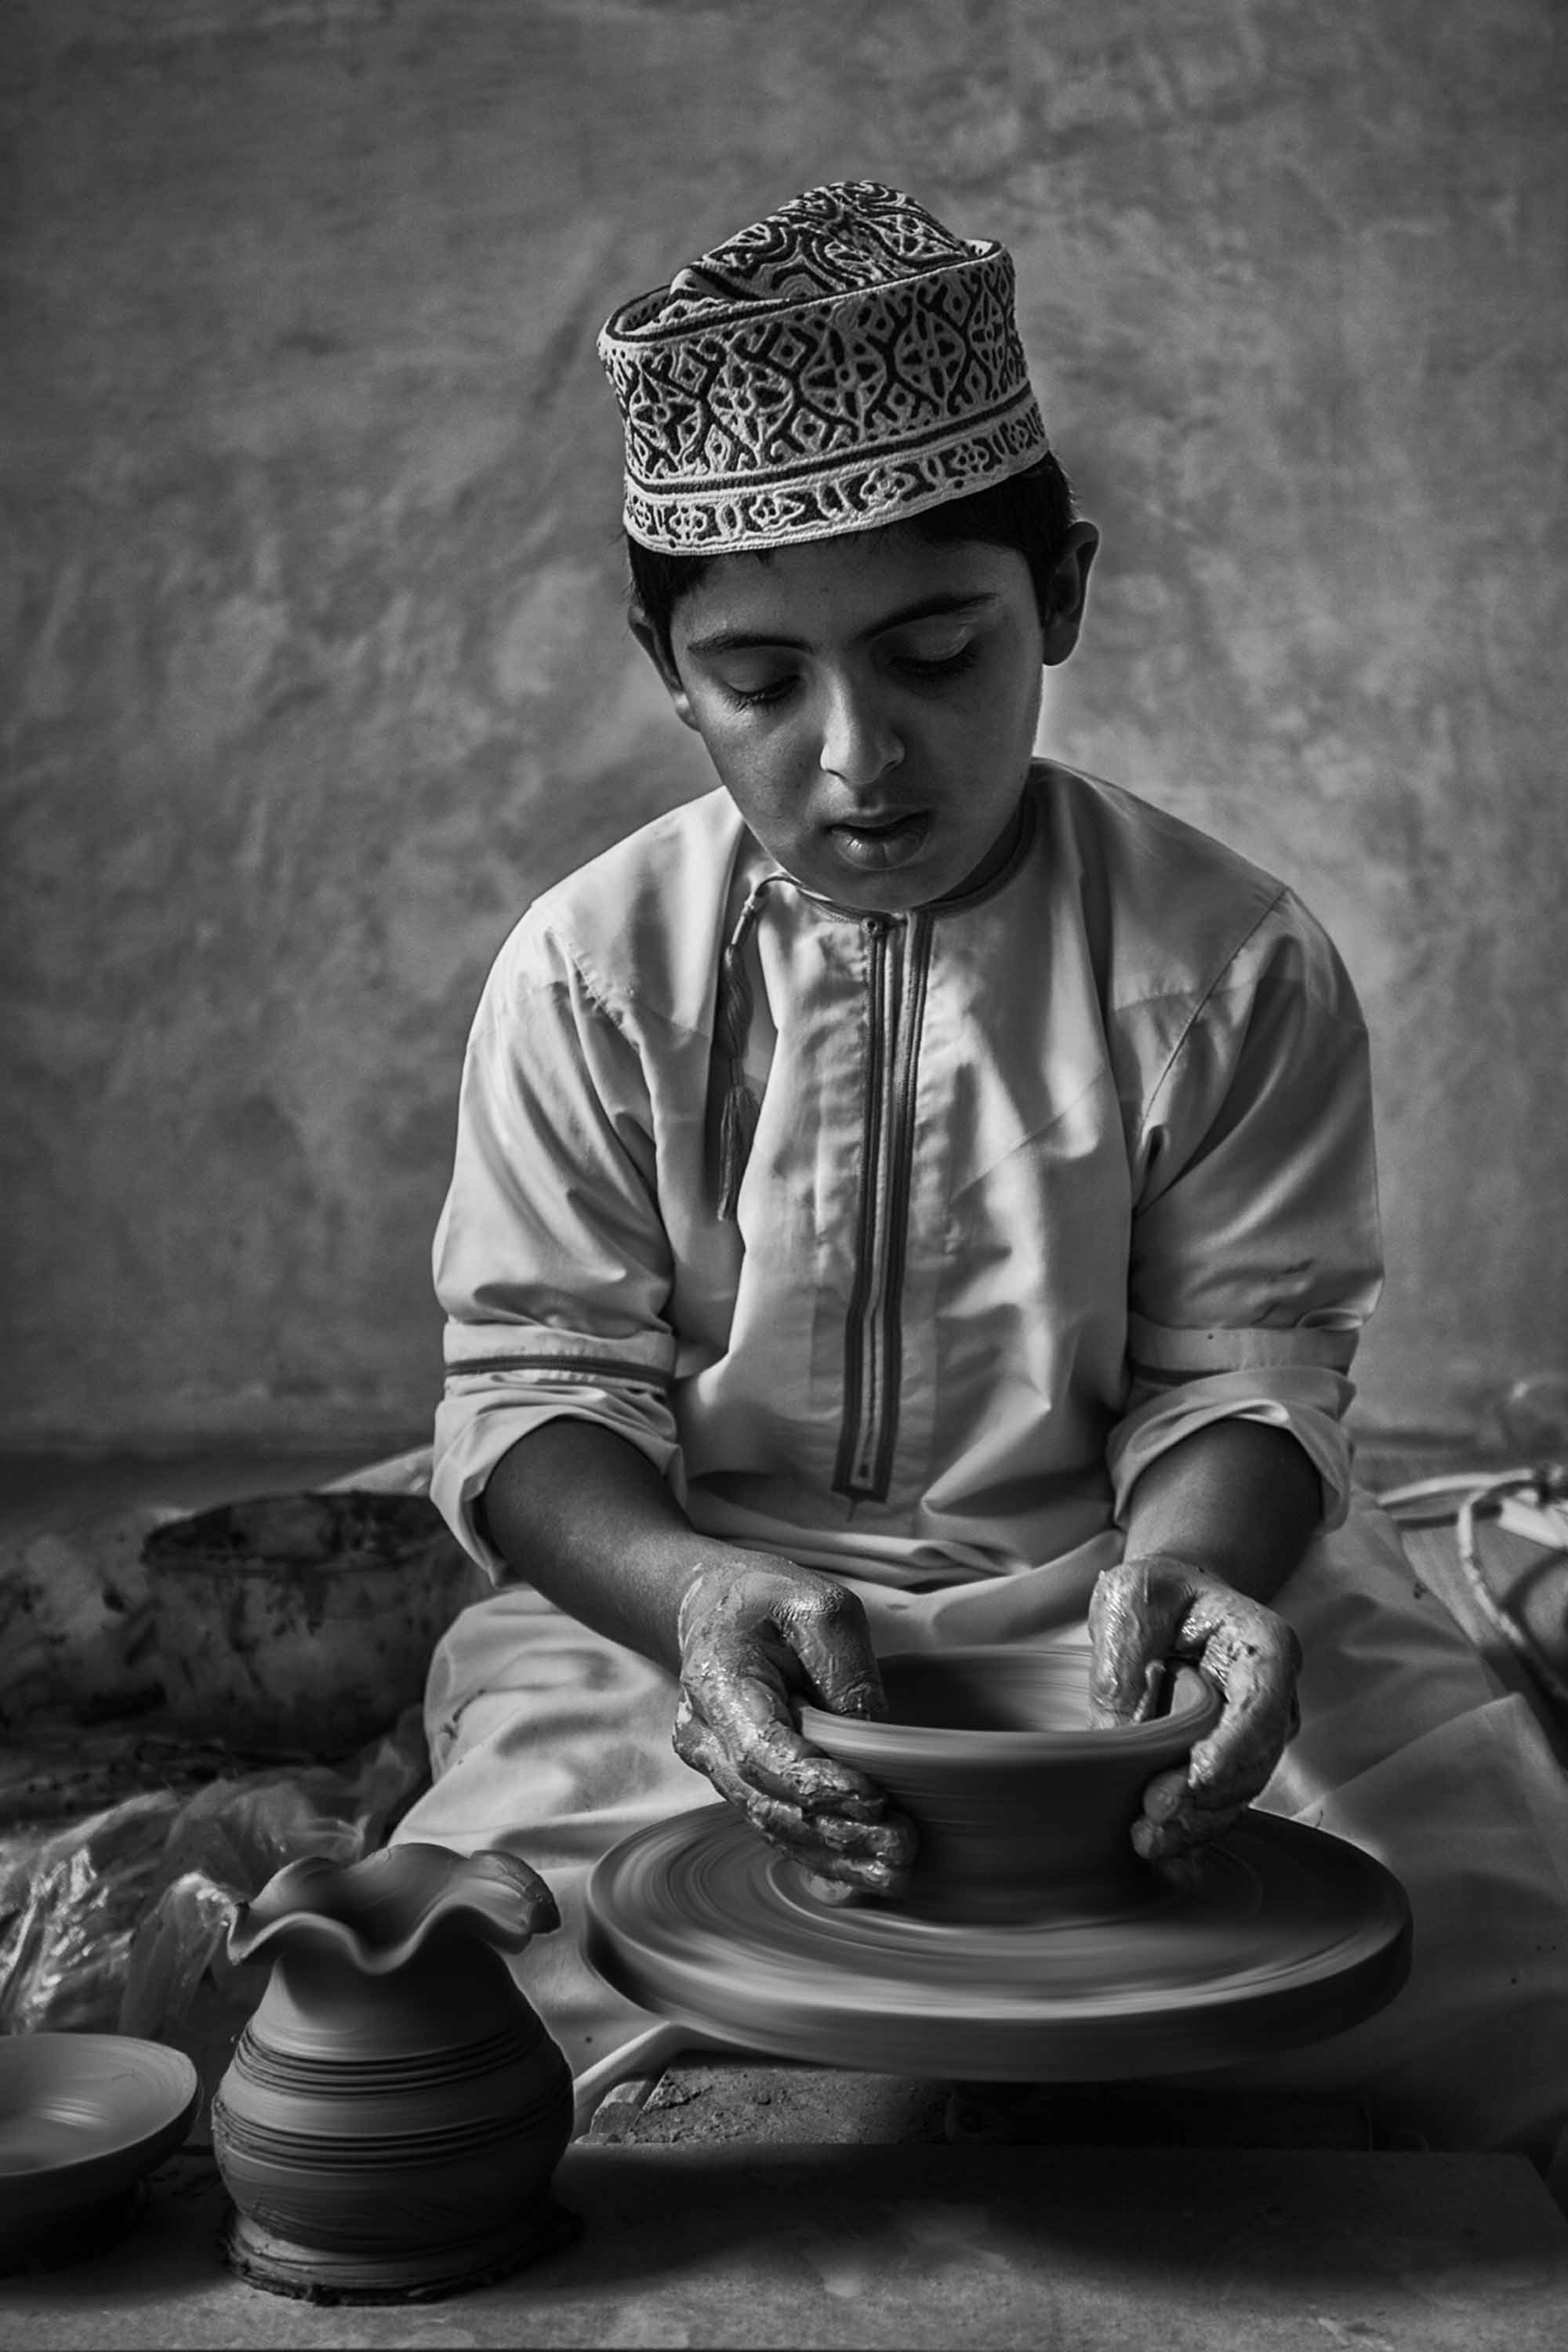 Winners of Oman Renaissance Day photography competition announced